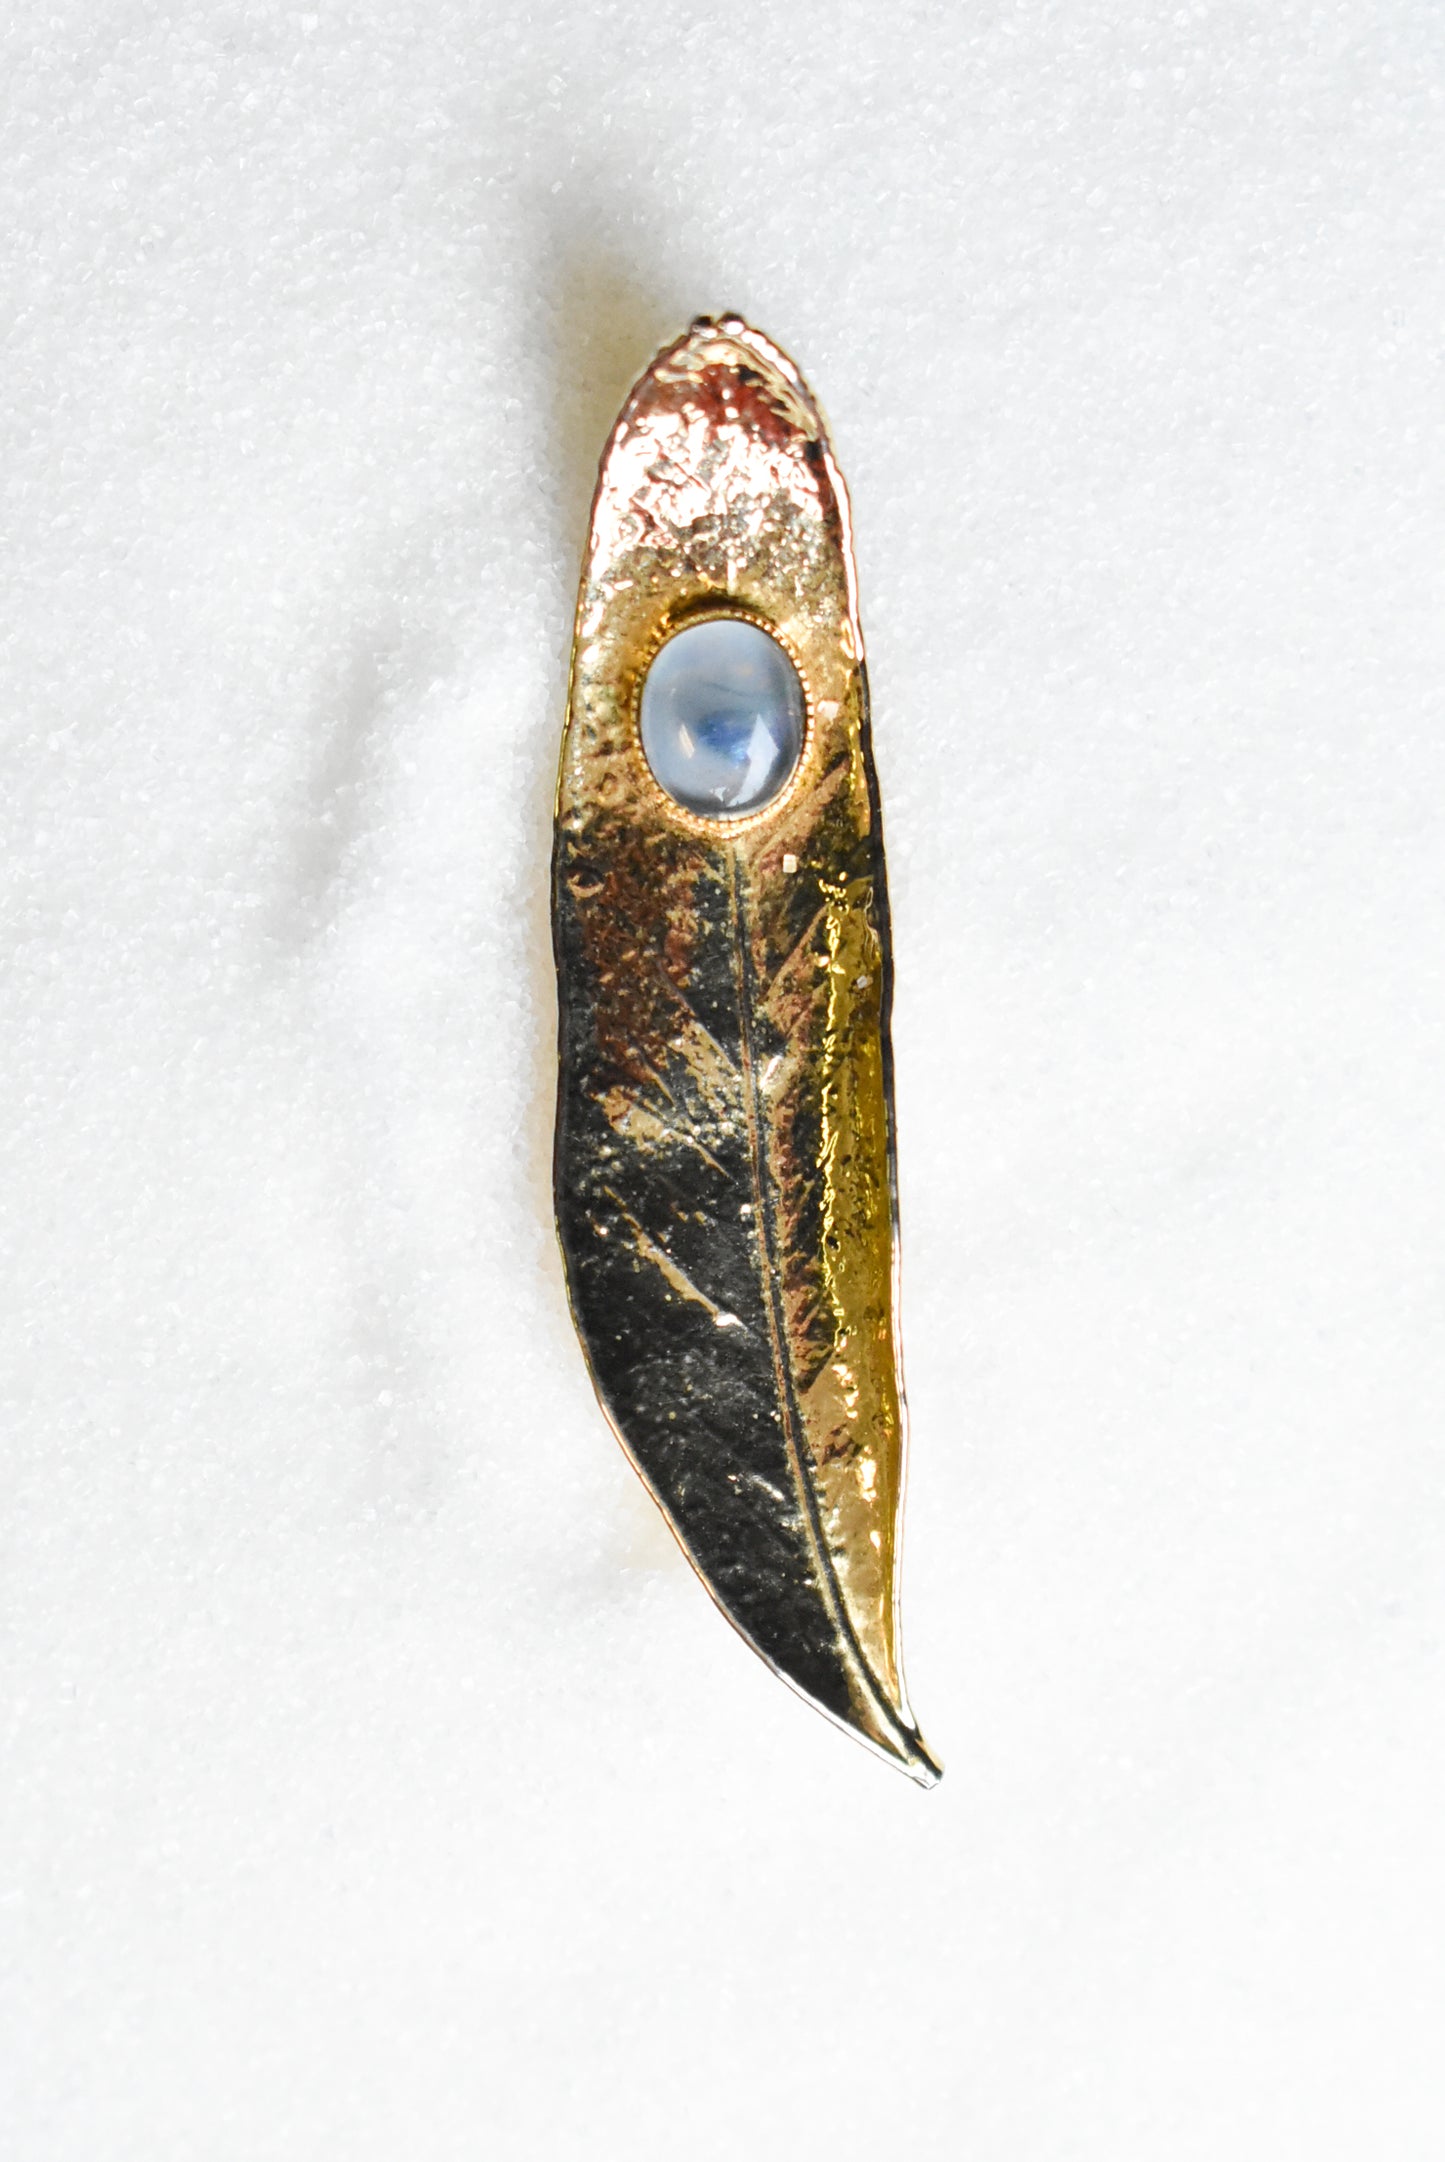 Leaf brooch with opaline stone